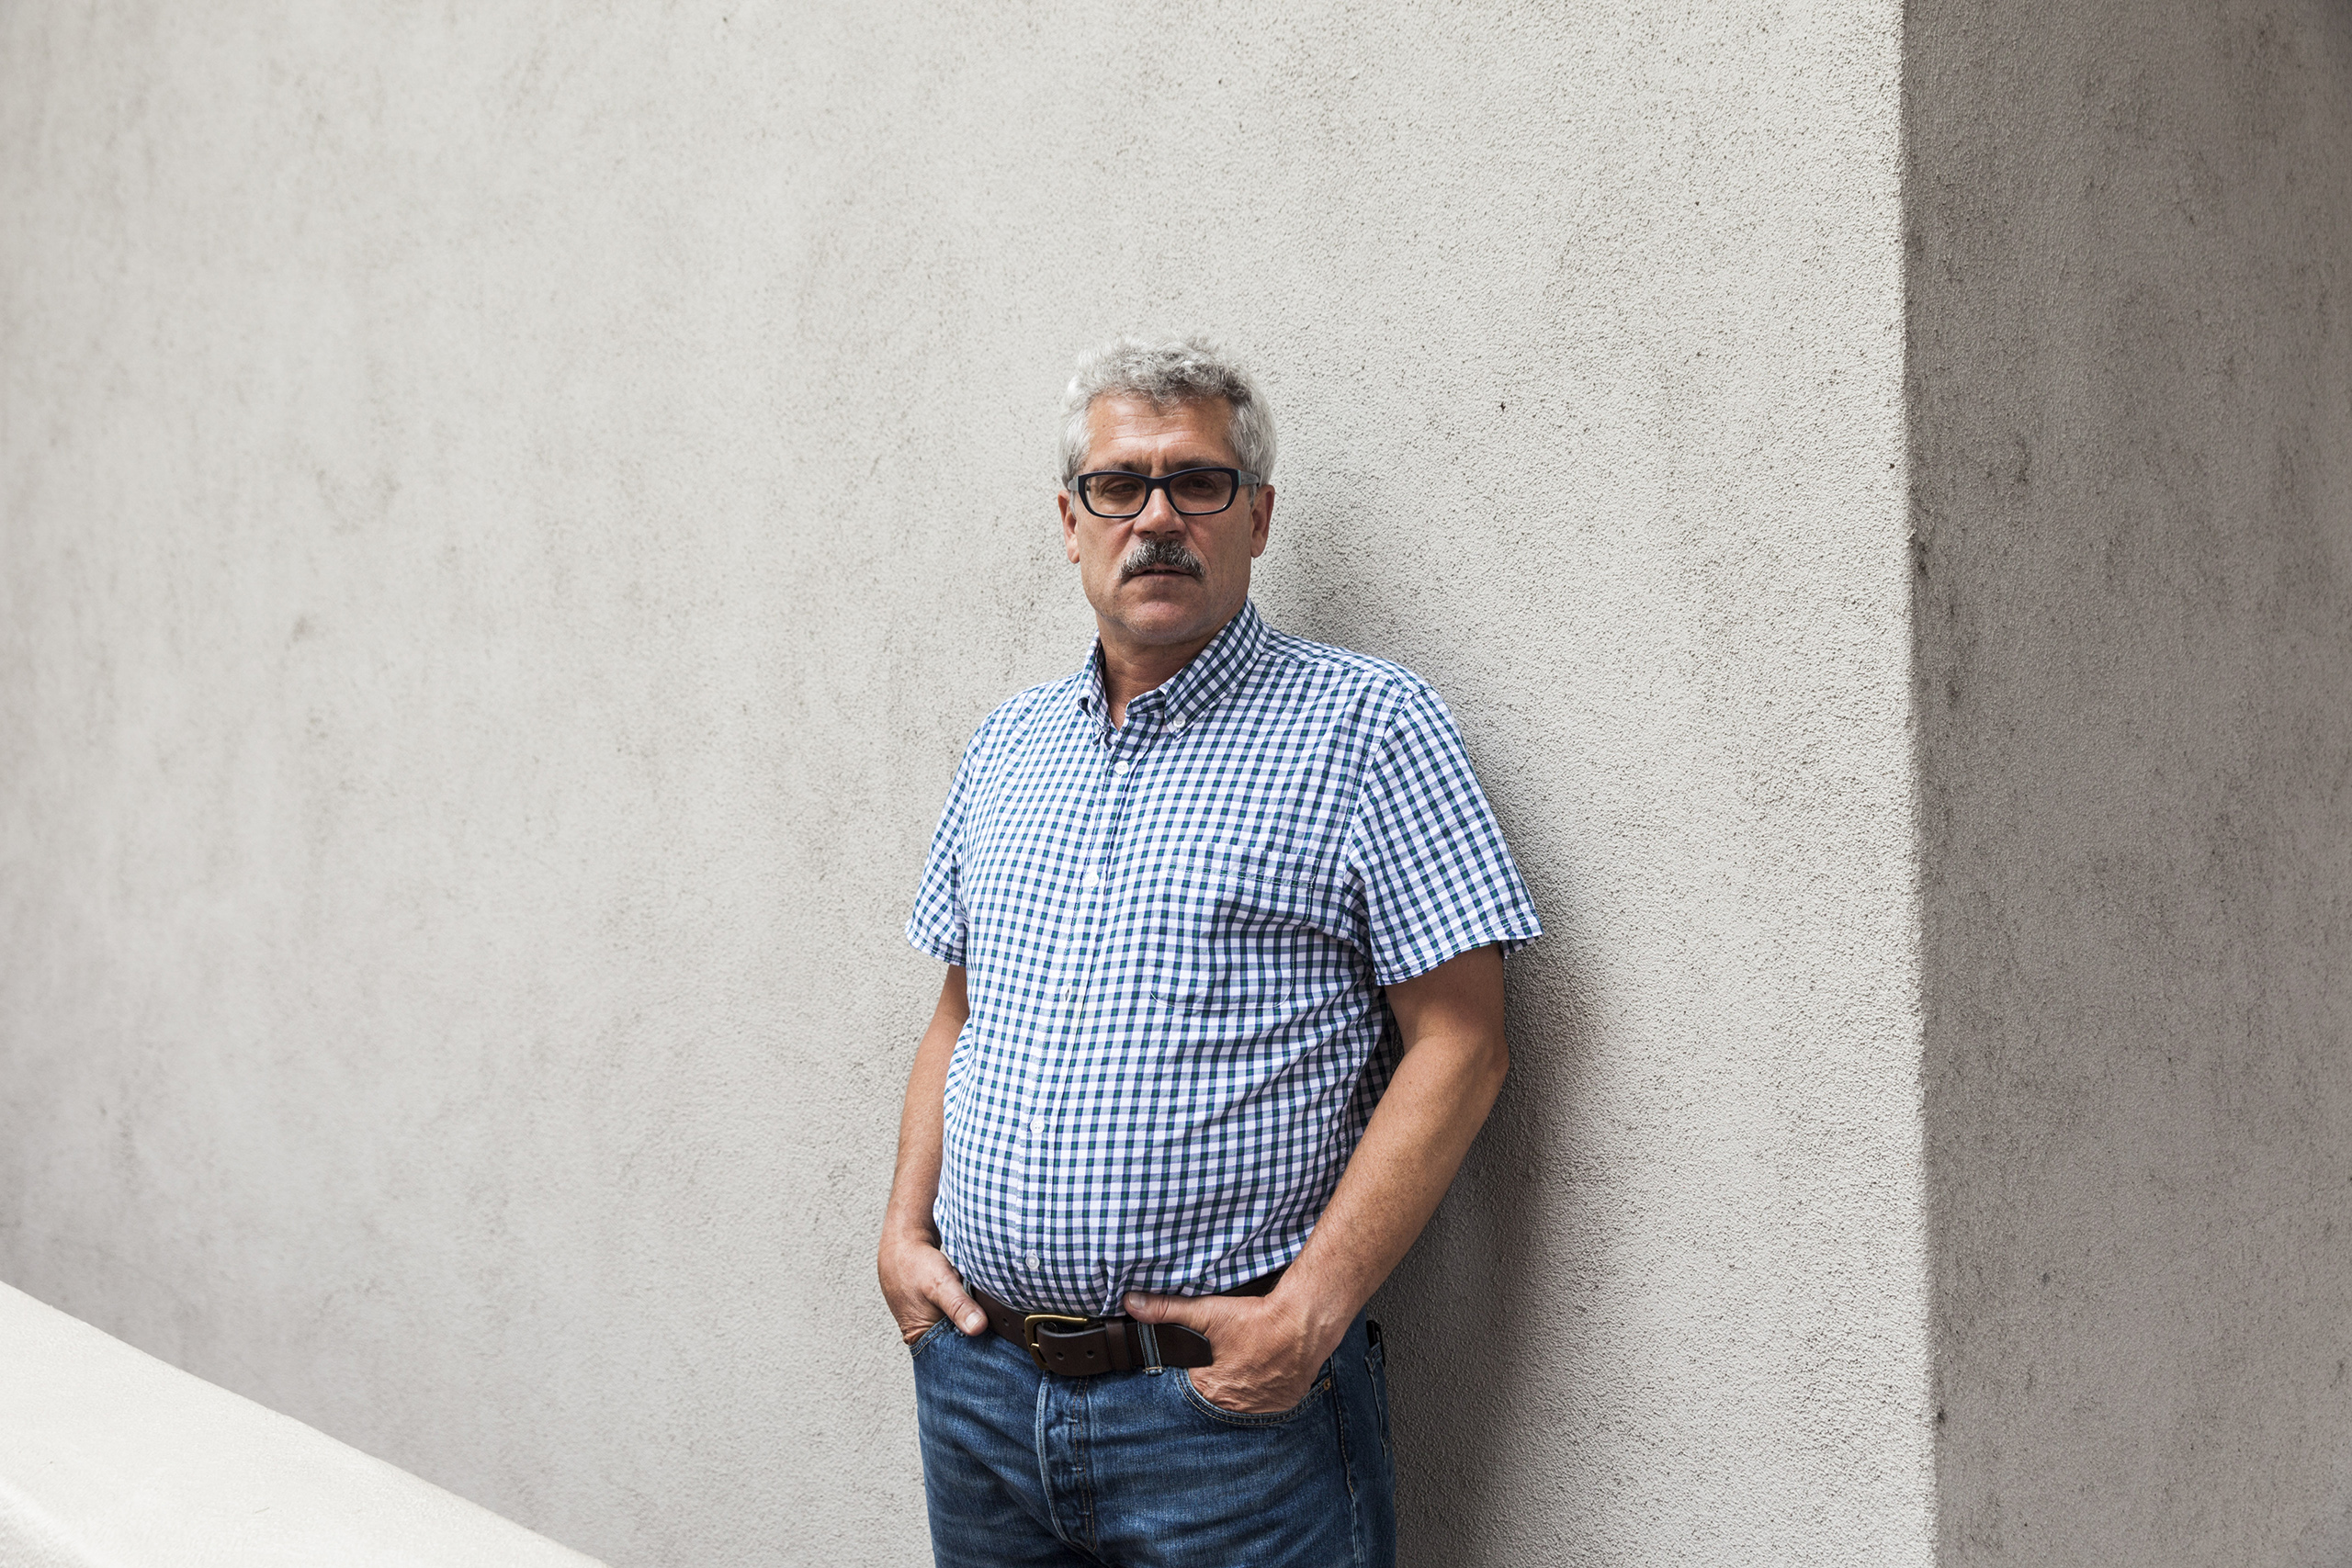 Grigory Rodchenkov, who ran the 2014 Sochi Olympic Games antidoping test laboratory, in Los Angeles, May 5, 2016. Rodchenkov said he developed a three-drug cocktail of banned substances that he provided to dozens of Russian athletes. (Emily Berl—The New York Times/Redux)